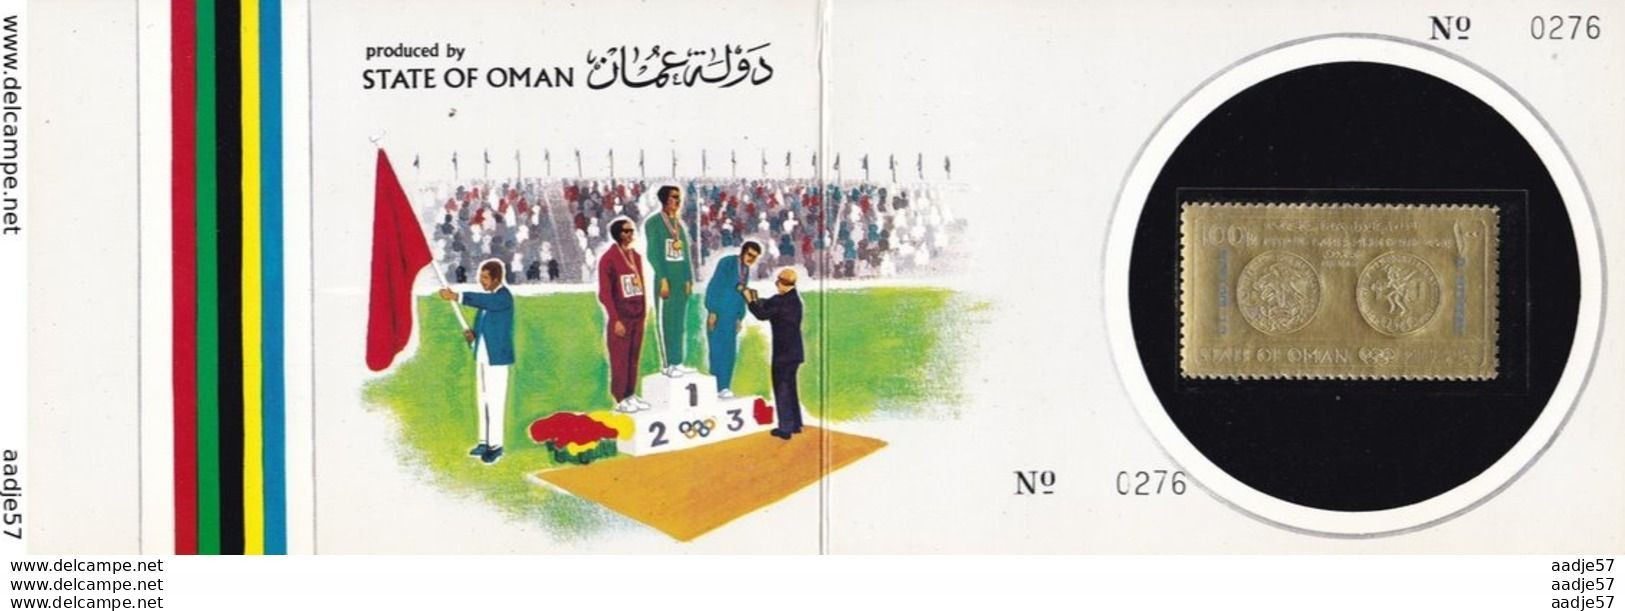 Booklet Wit Golden Stamp - State Of Oman - Olympics Mexico 1968 Gr Bitain D.Hemery Nummered MNH** - Sommer 1968: Mexico